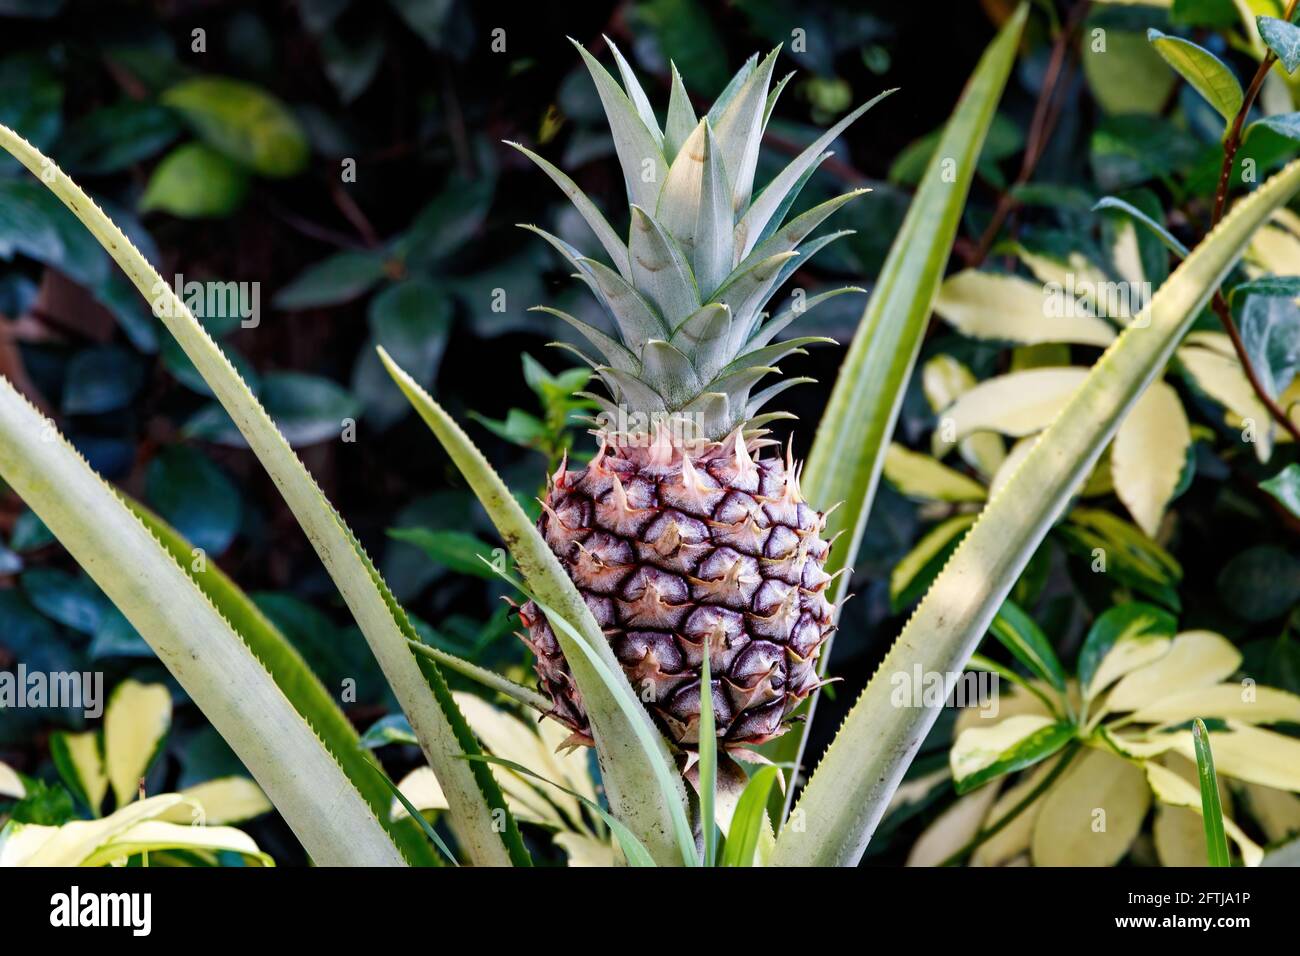 Growing pineapple aka Ananas comosus tropical plant from the Bromeliaceae family. South American cultivated in Palm Beach Florida near Broward County, Stock Photo